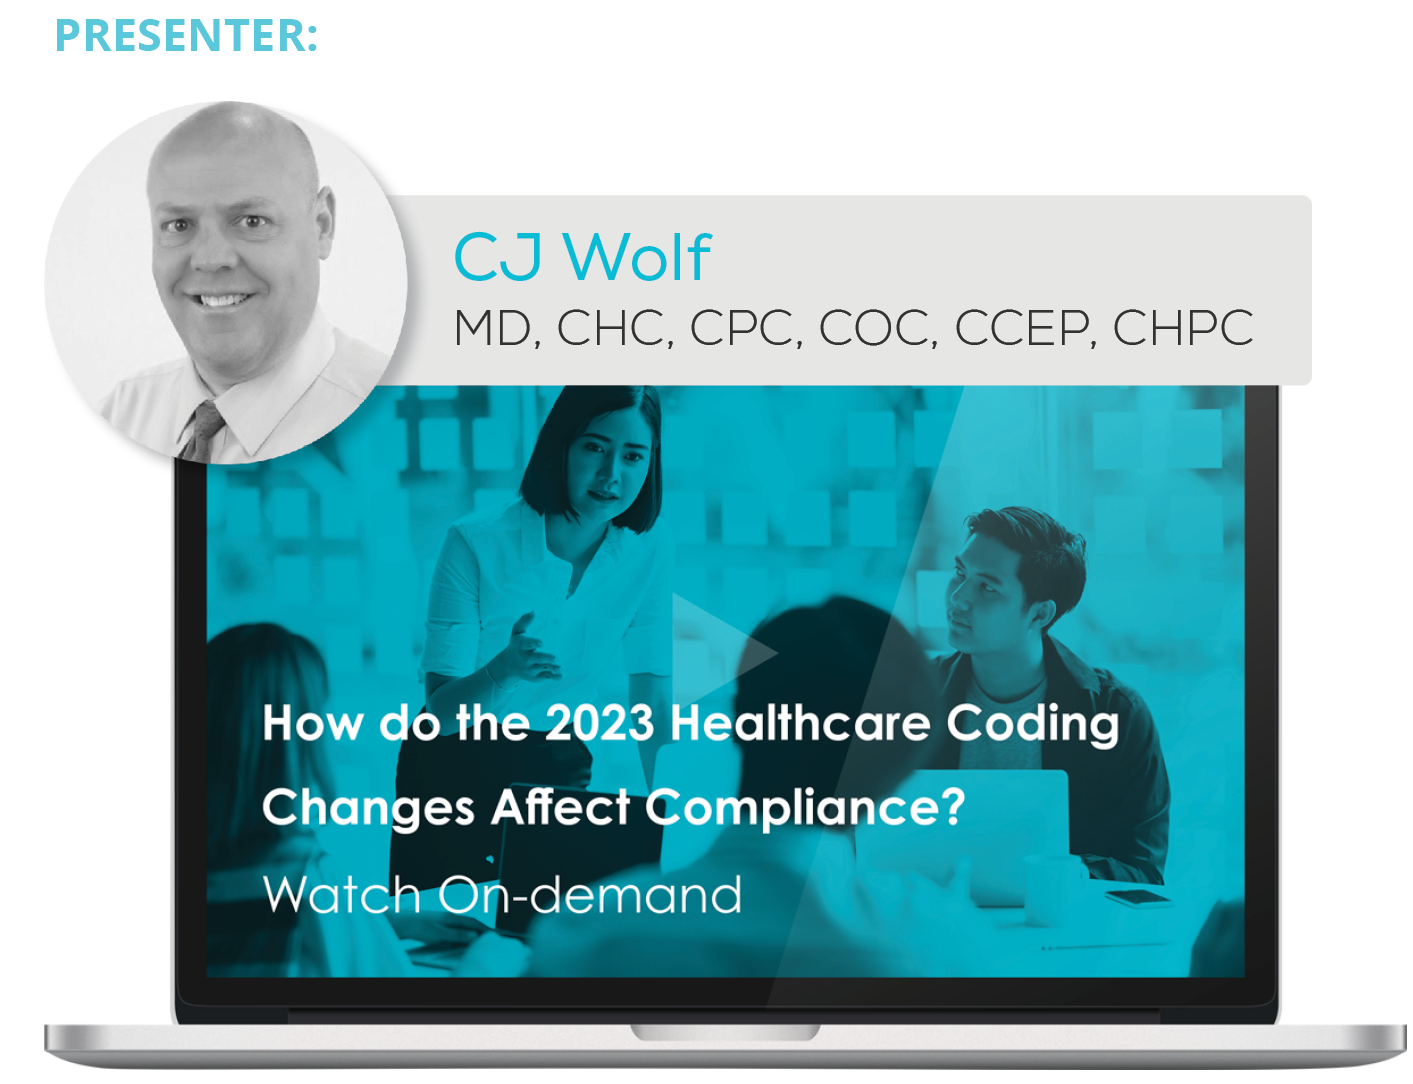 Watch the Webinar - How do the 2023 Healthcare Coding Changes Affect Compliance?